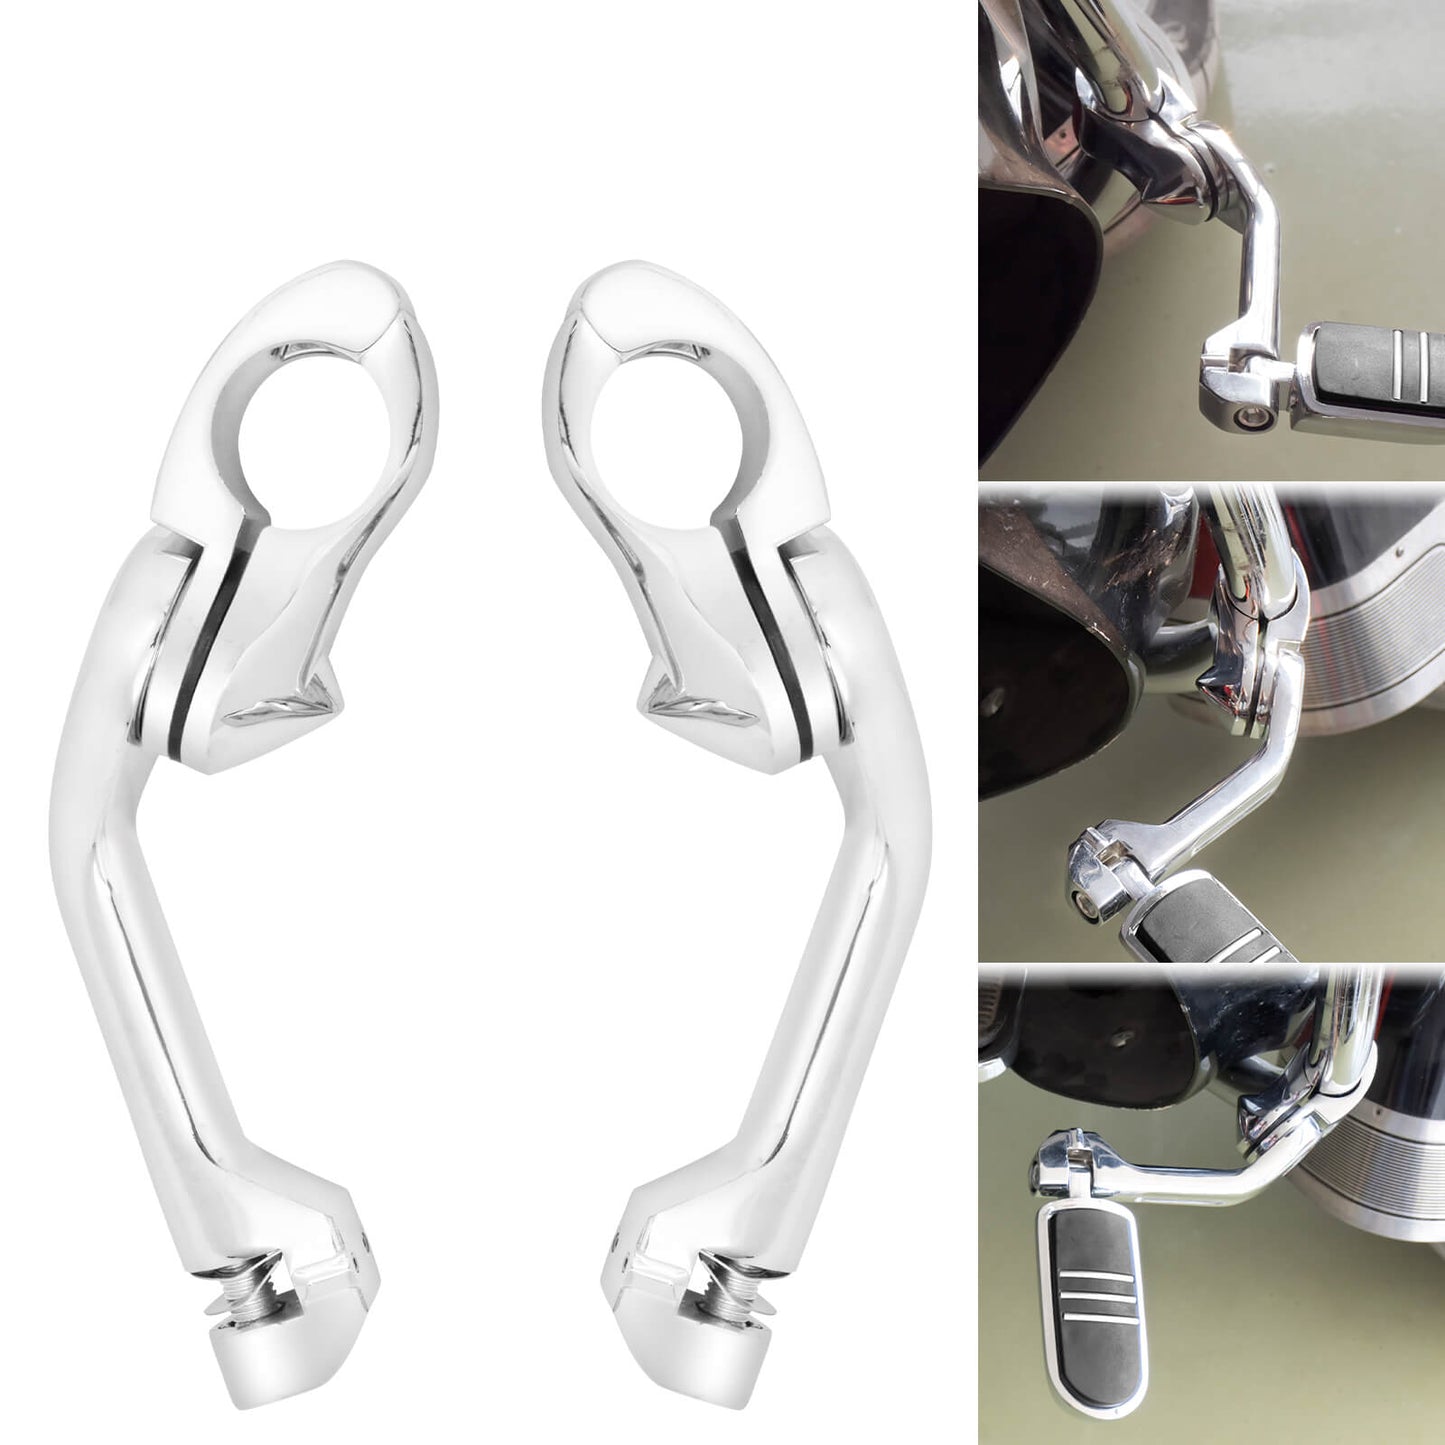 ZH001408-adjustable-highway-foot-pegs-for-harley-chrome